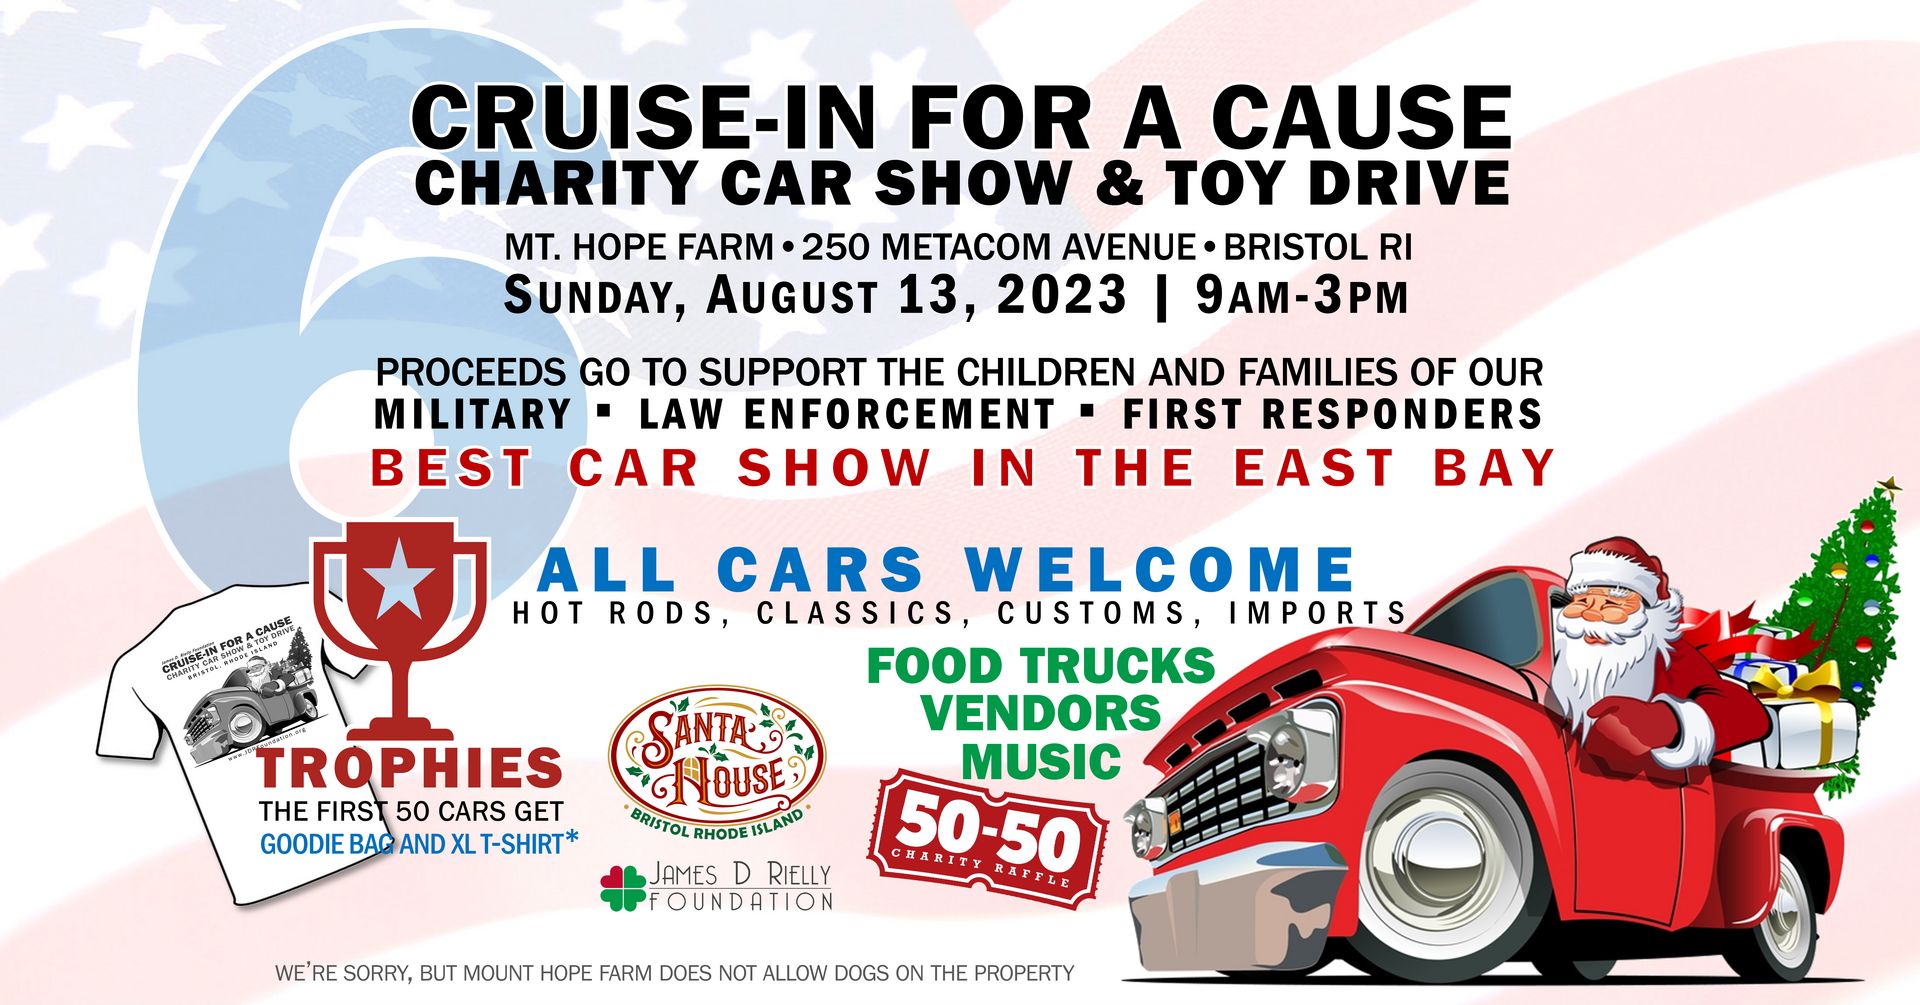 Cruise-in for a Cause 6 – Charity Car Show and Toy Drive, Bristol, Rhode Island, United States